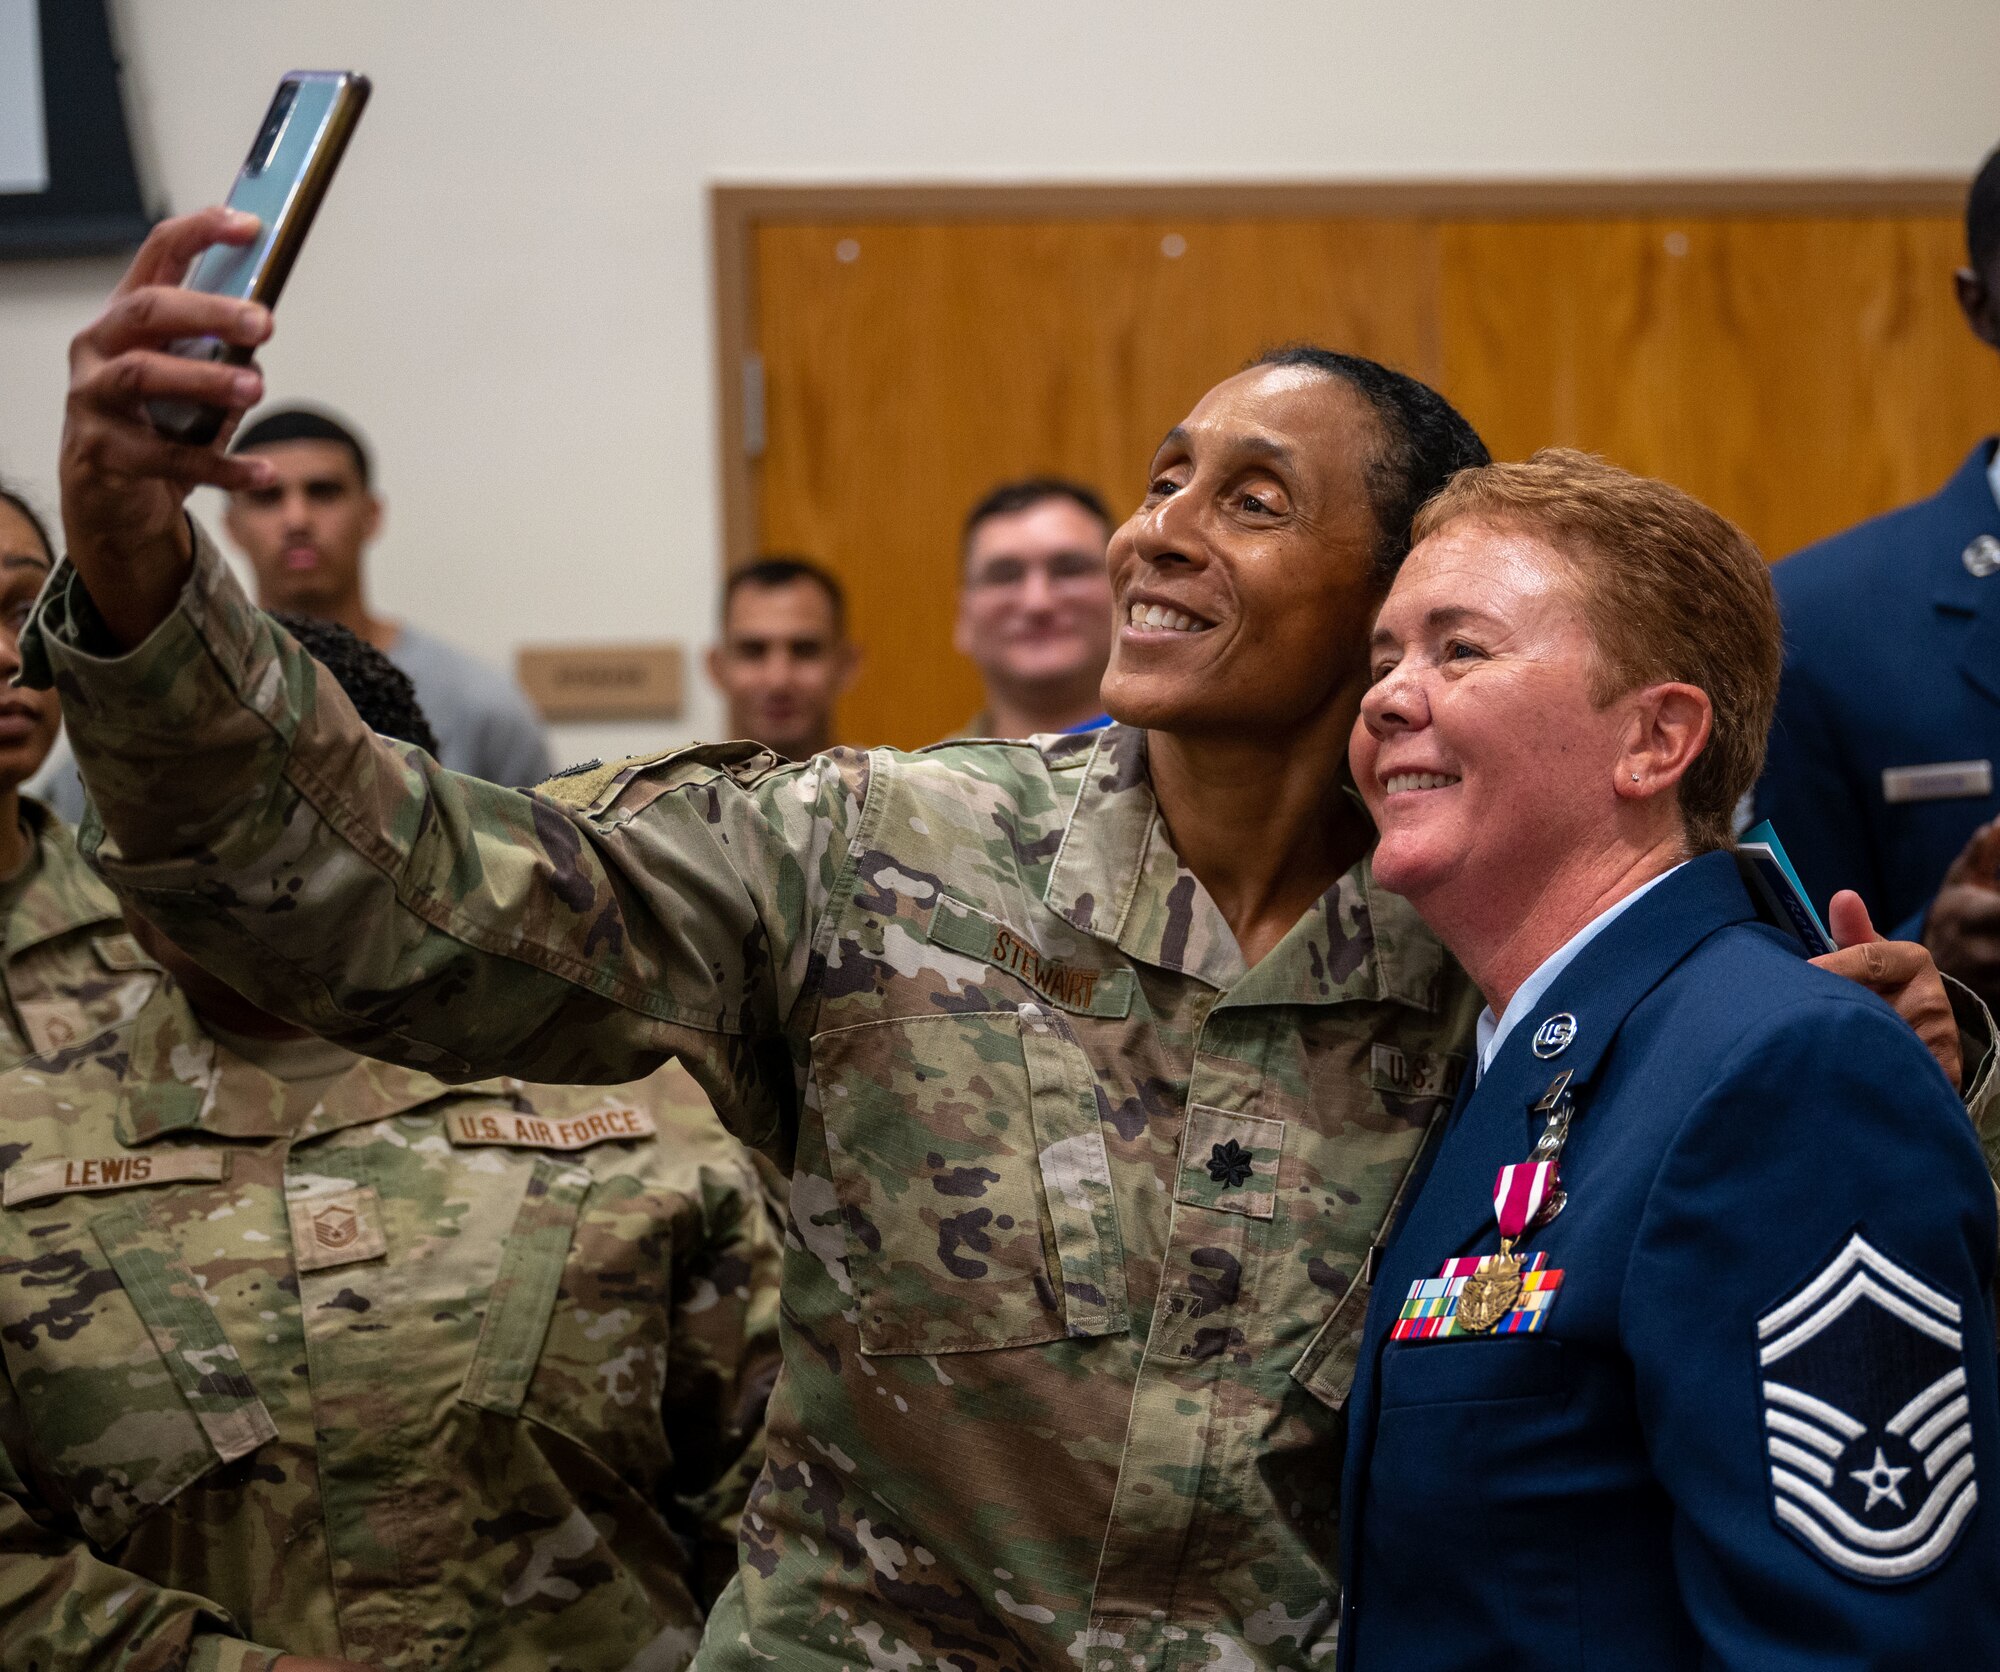 Lt Col Powell takes a selfie with Baldelli